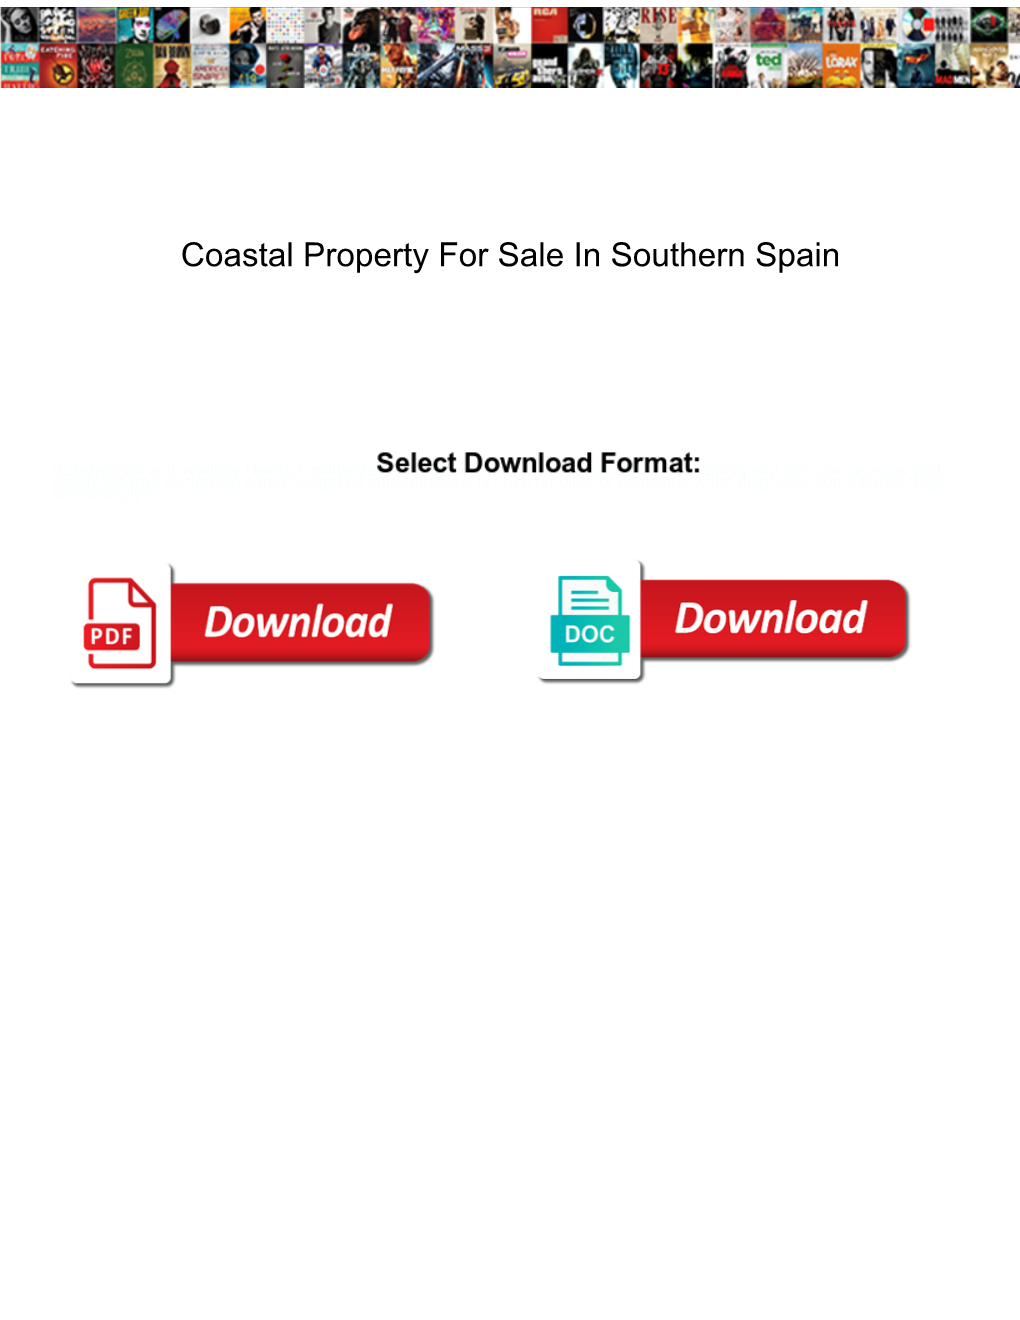 Coastal Property for Sale in Southern Spain